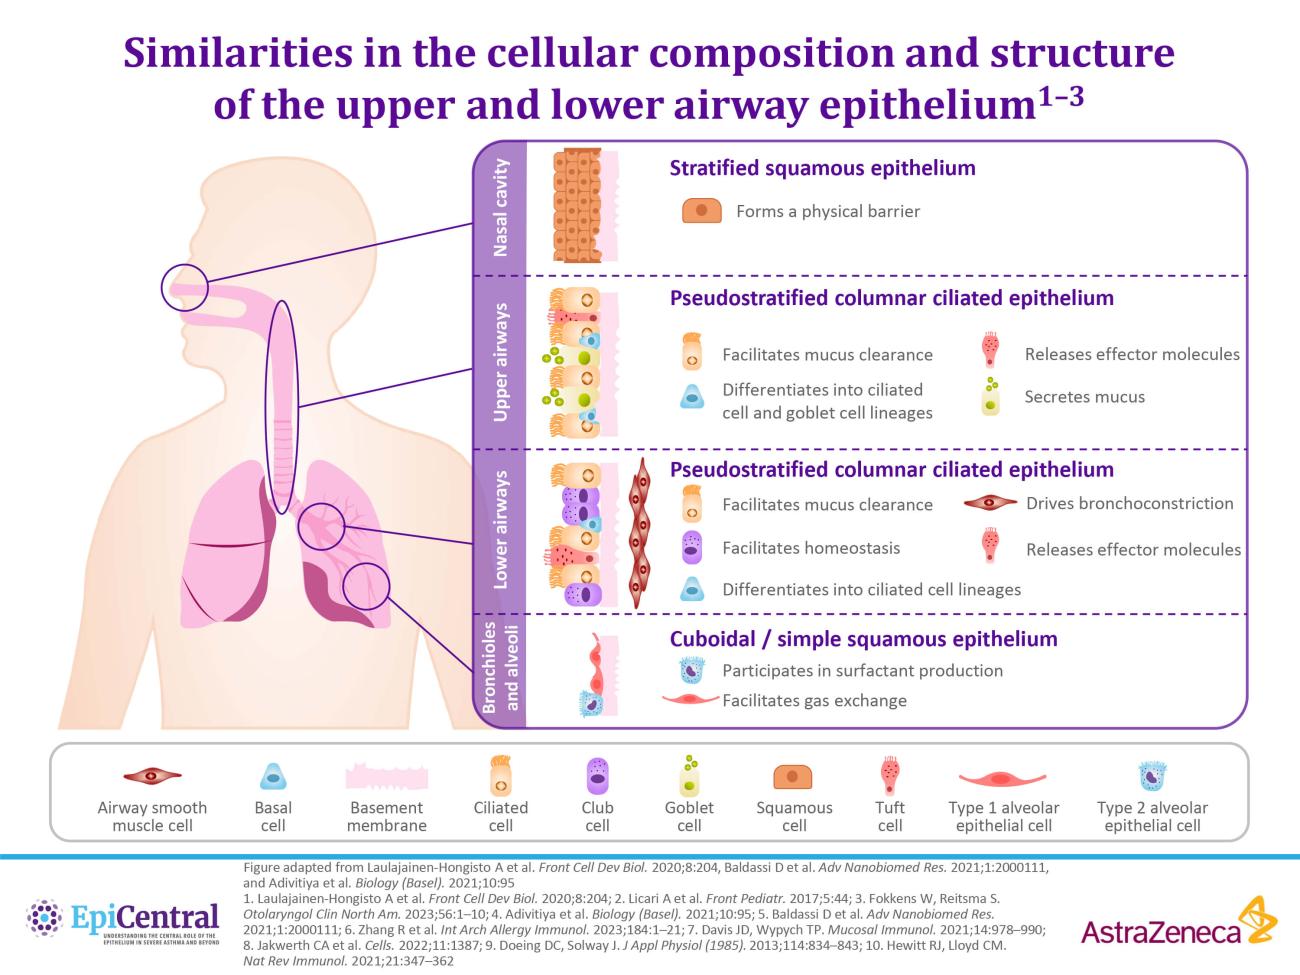 Similarities in the cellular composition and structure of the upper and lower airway epithelium